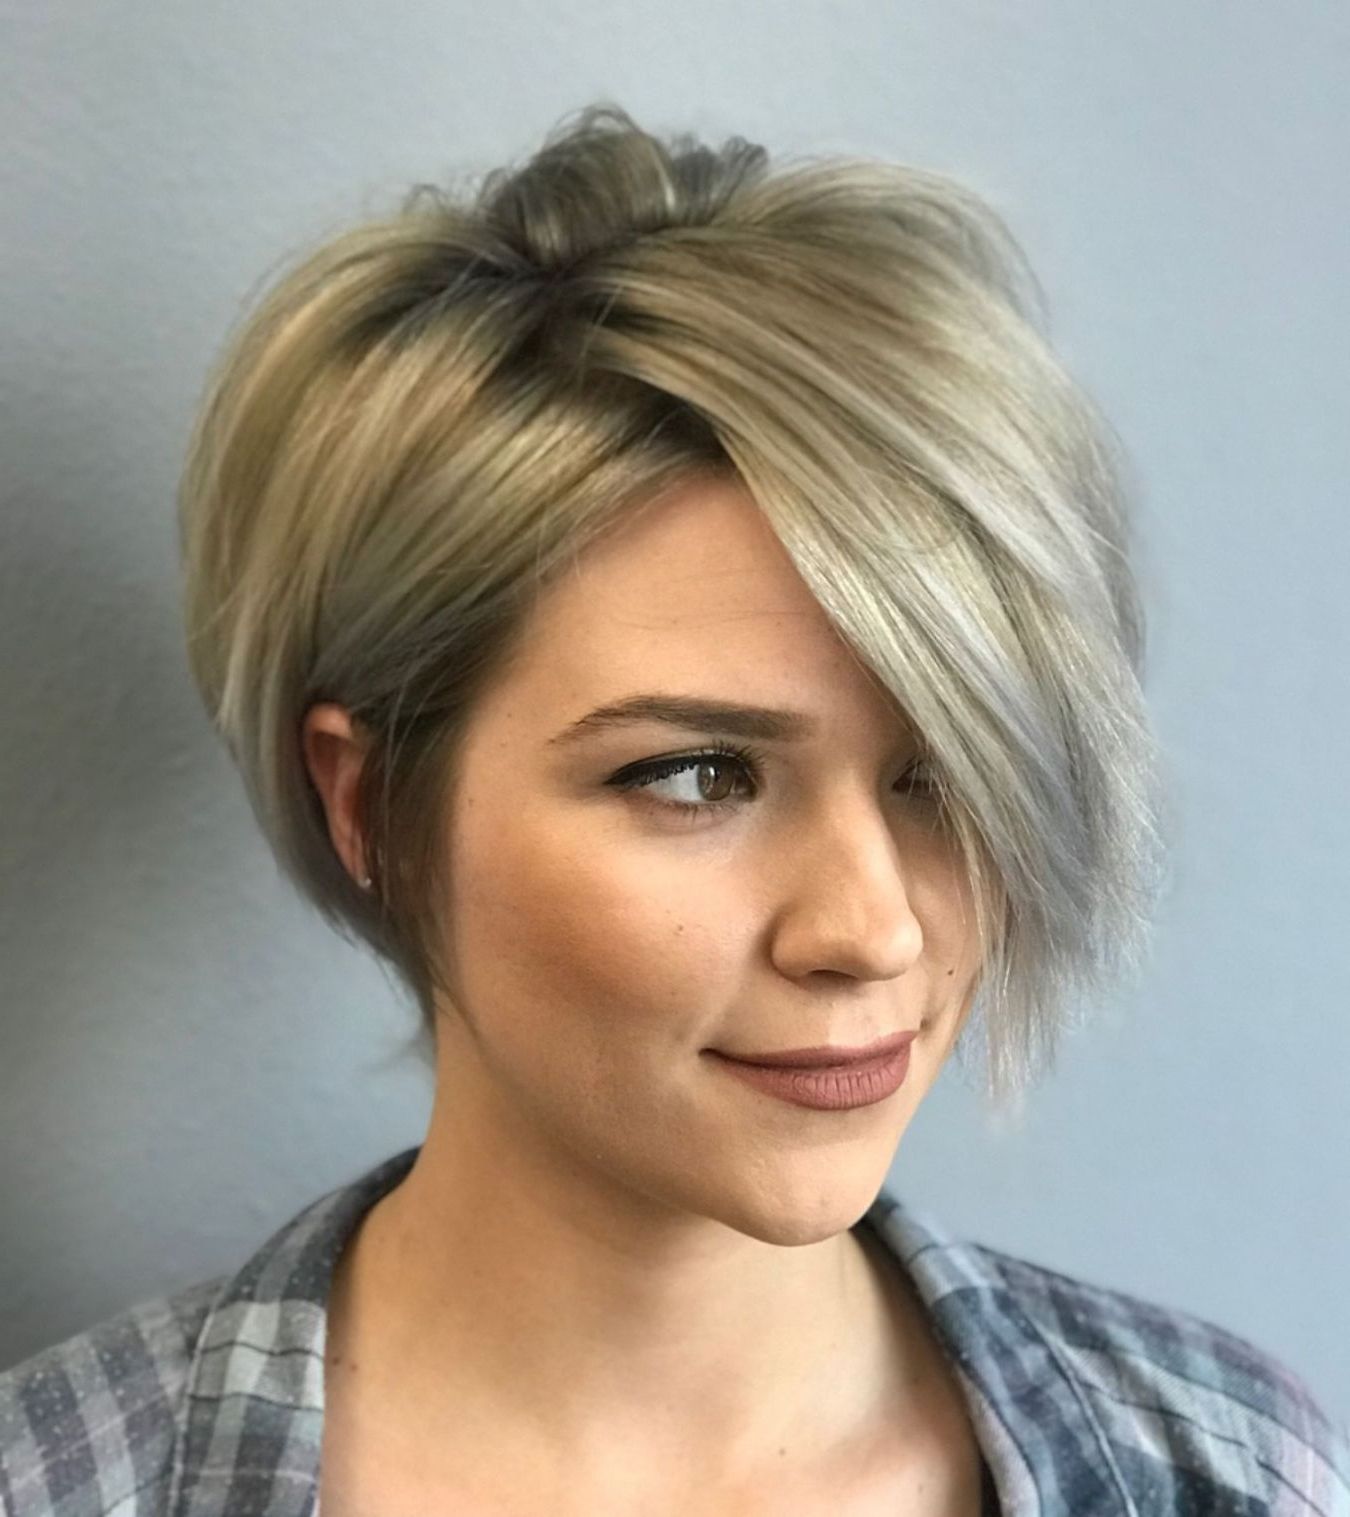 Hairstyles : Razored Blonde Bob Licious 100 Mind Blowing Inside Razored Shaggy Bob Hairstyles With Bangs (Gallery 20 of 20)